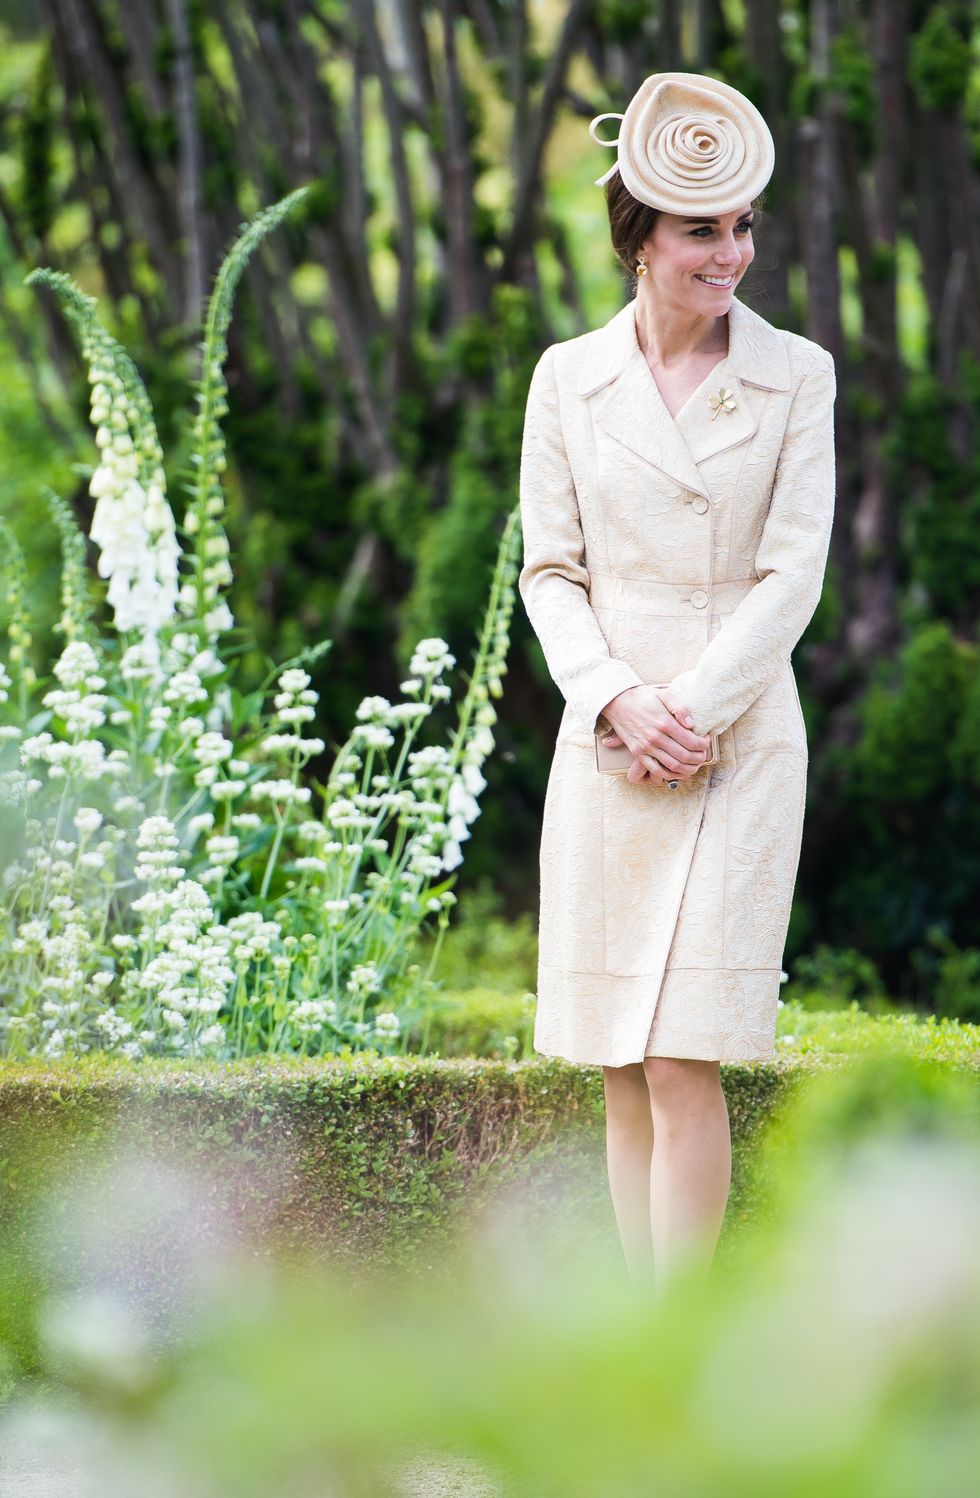 The Duke And Duchess Of Cambridge Attend The Secretary Of State For Northern Ireland's Garden Party